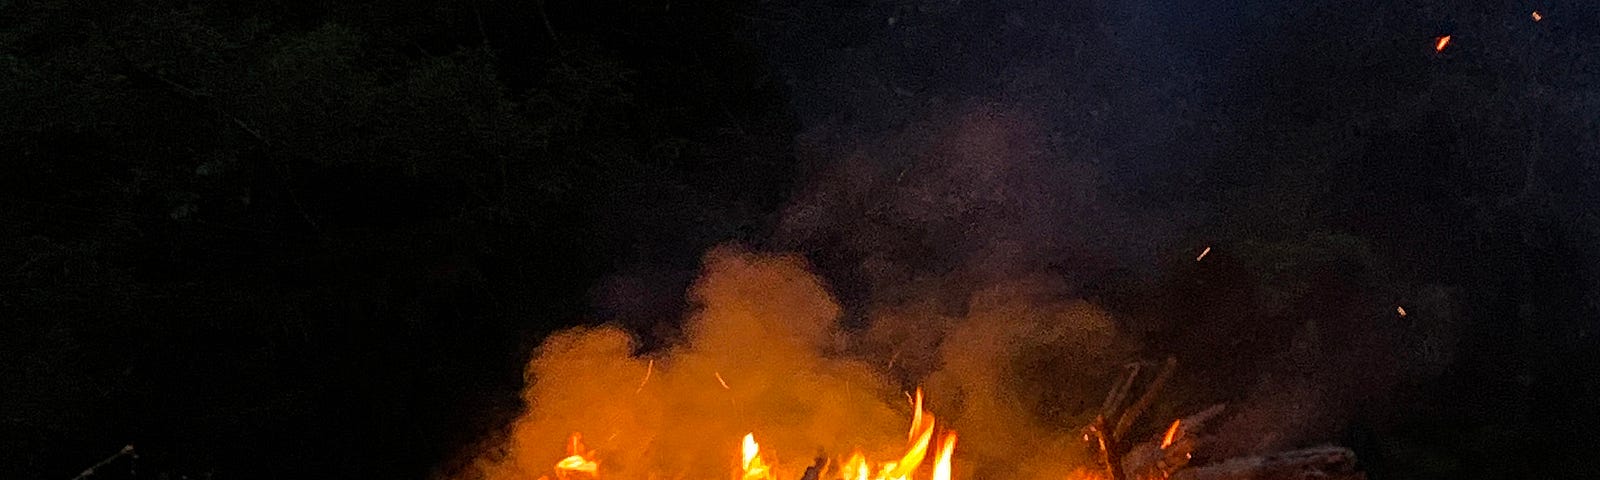 Large bonfire with redwoods in the background